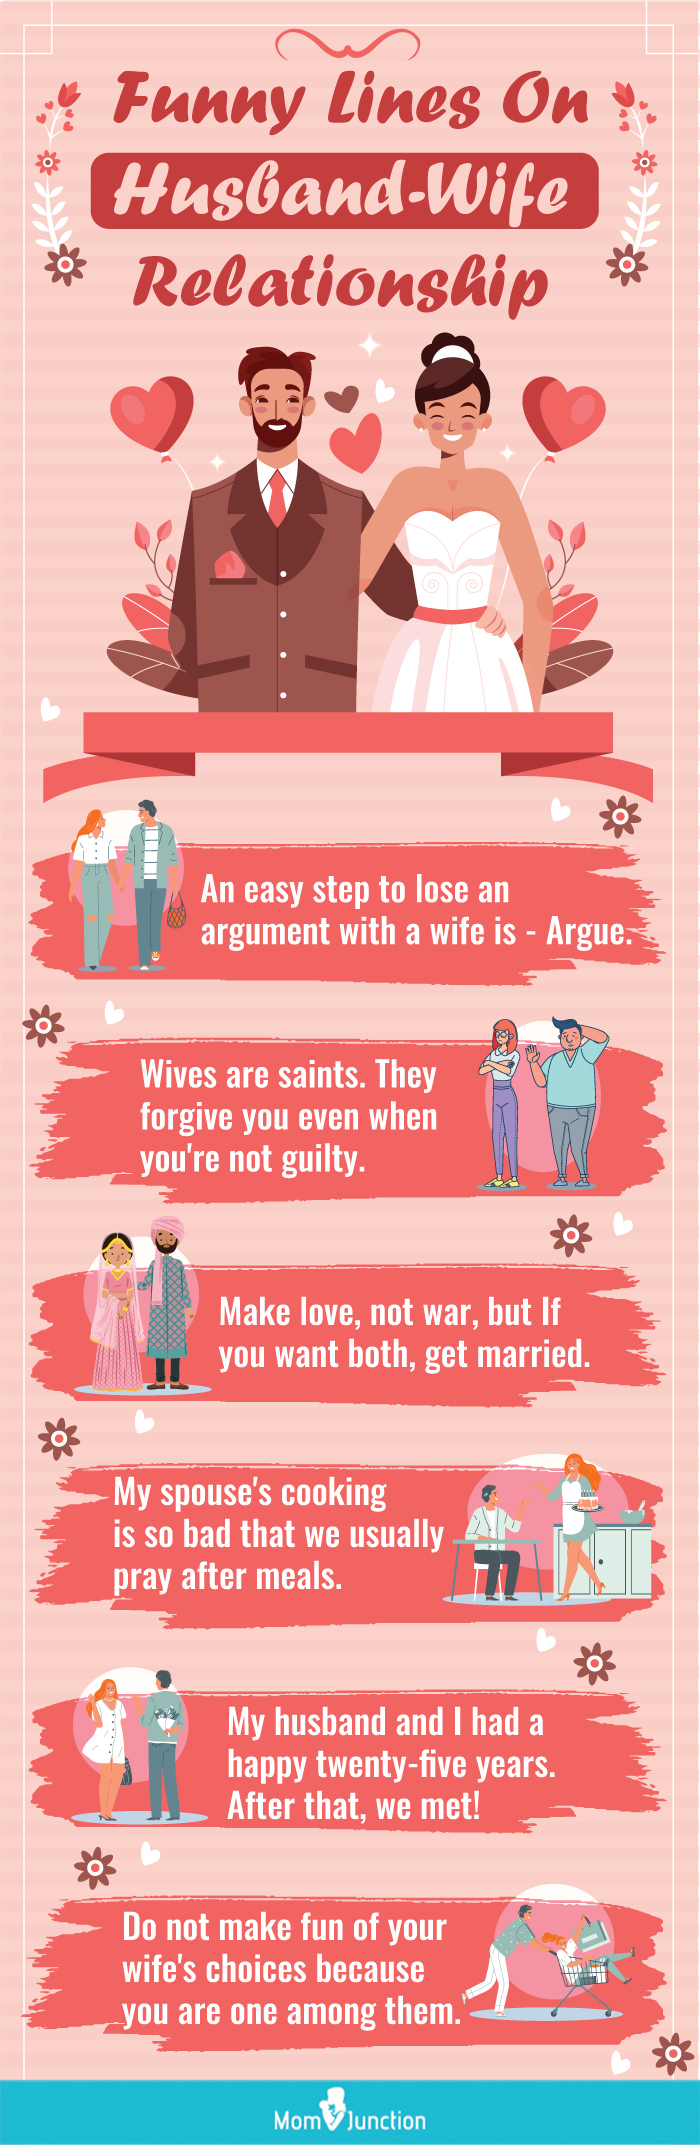 funny marriage jokes about men